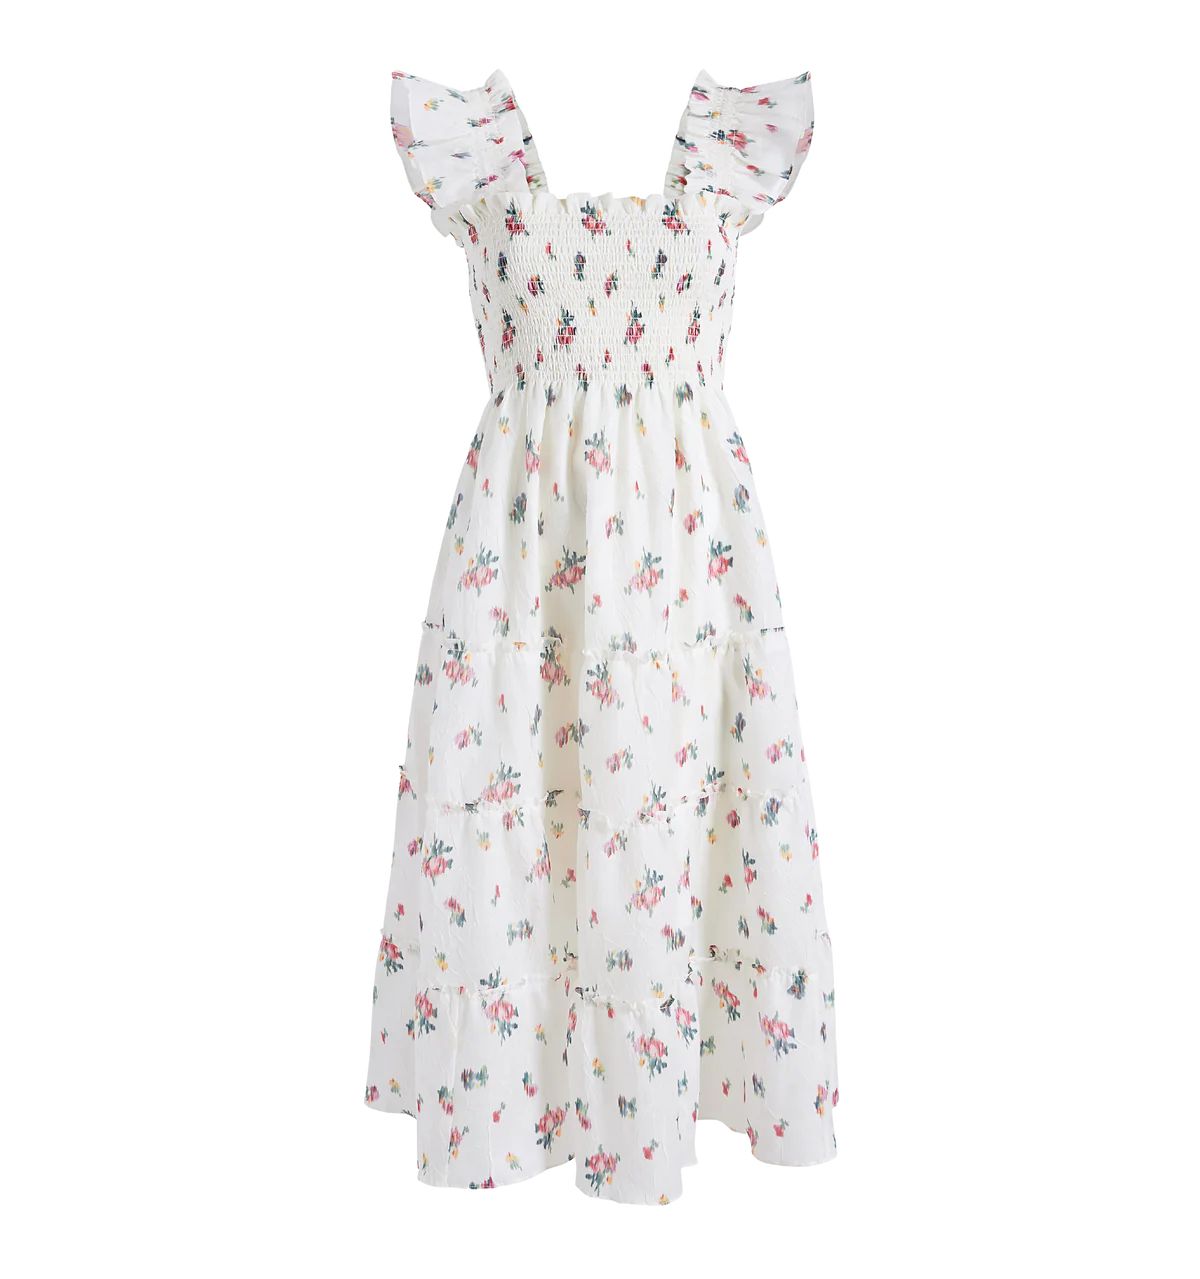 The Ellie Nap Dress in Ivory Ikat Floral Crushed Taffeta | Over The Moon